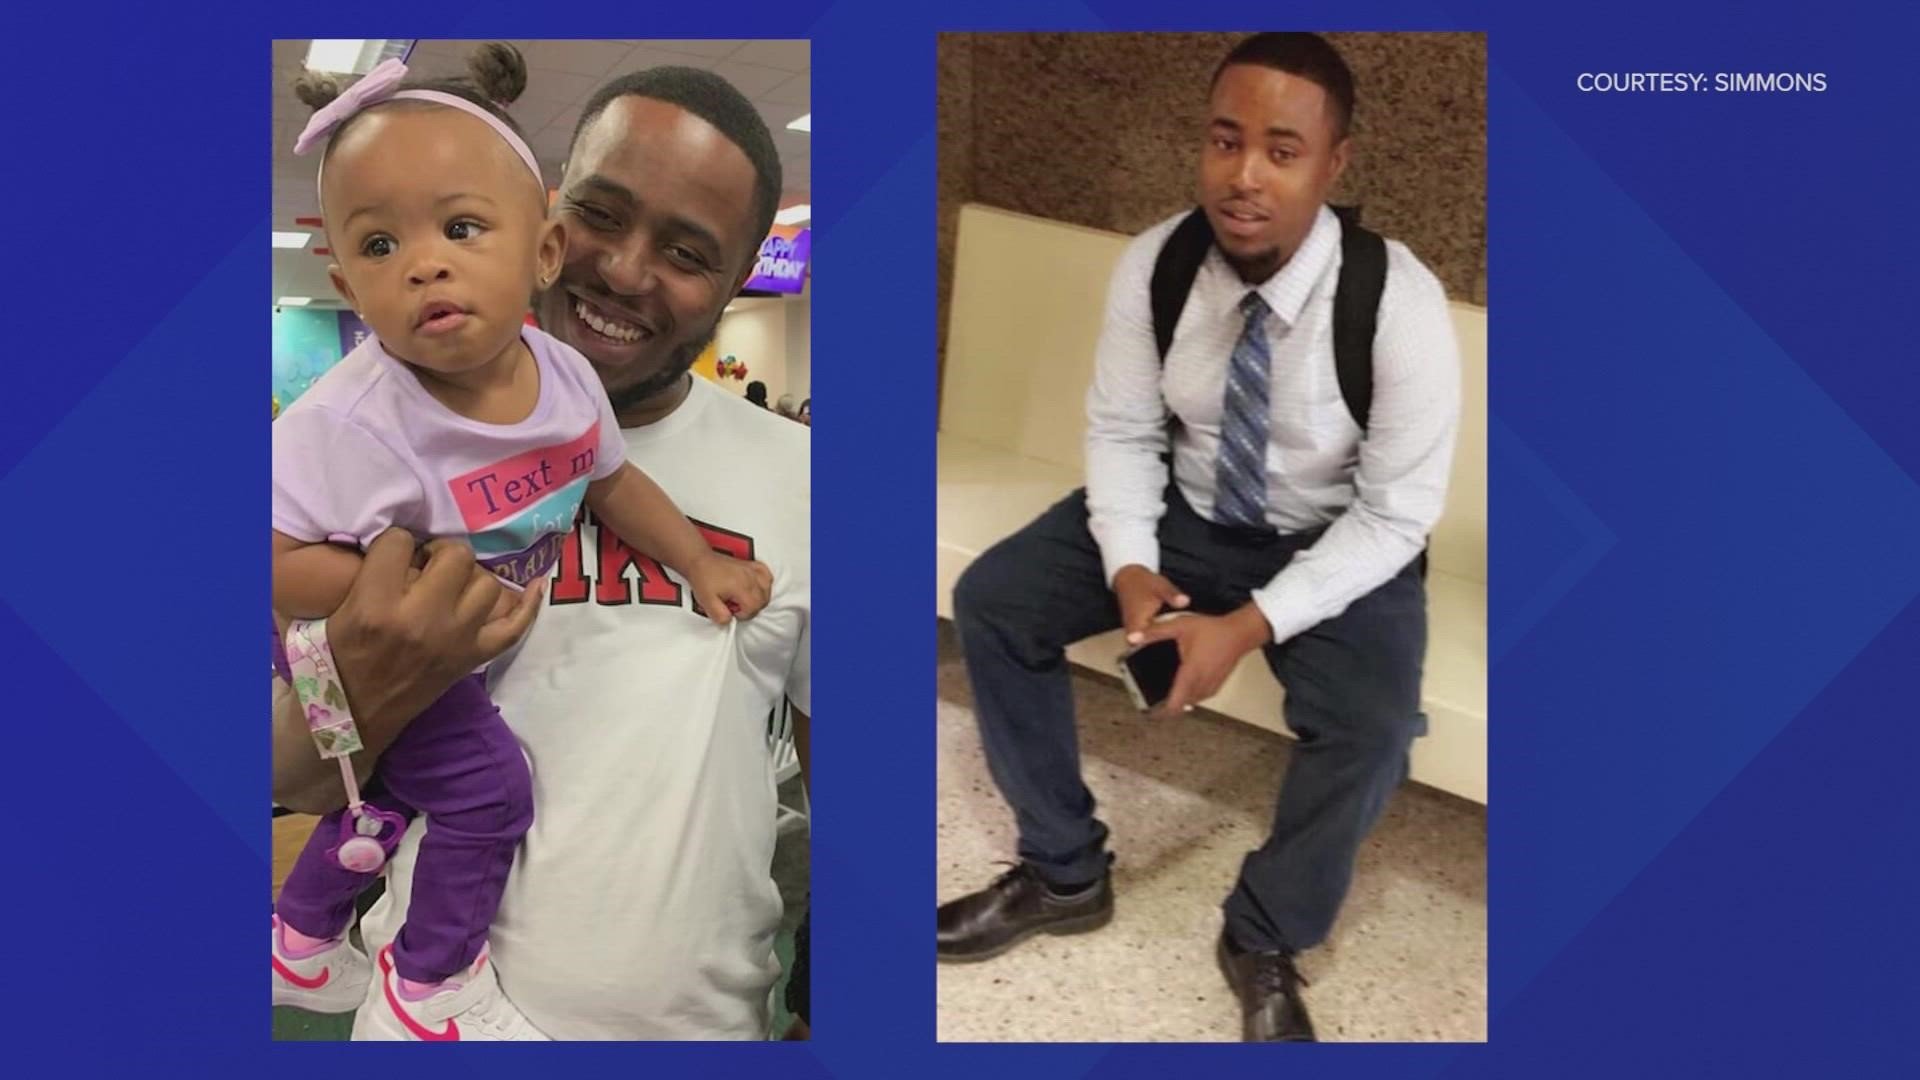 Lee Simmons Jr., 32, died at the scene and his 11-year-old son, who was in the backseat, witnessed the tragic accident. The boy was treated for minor injuries.